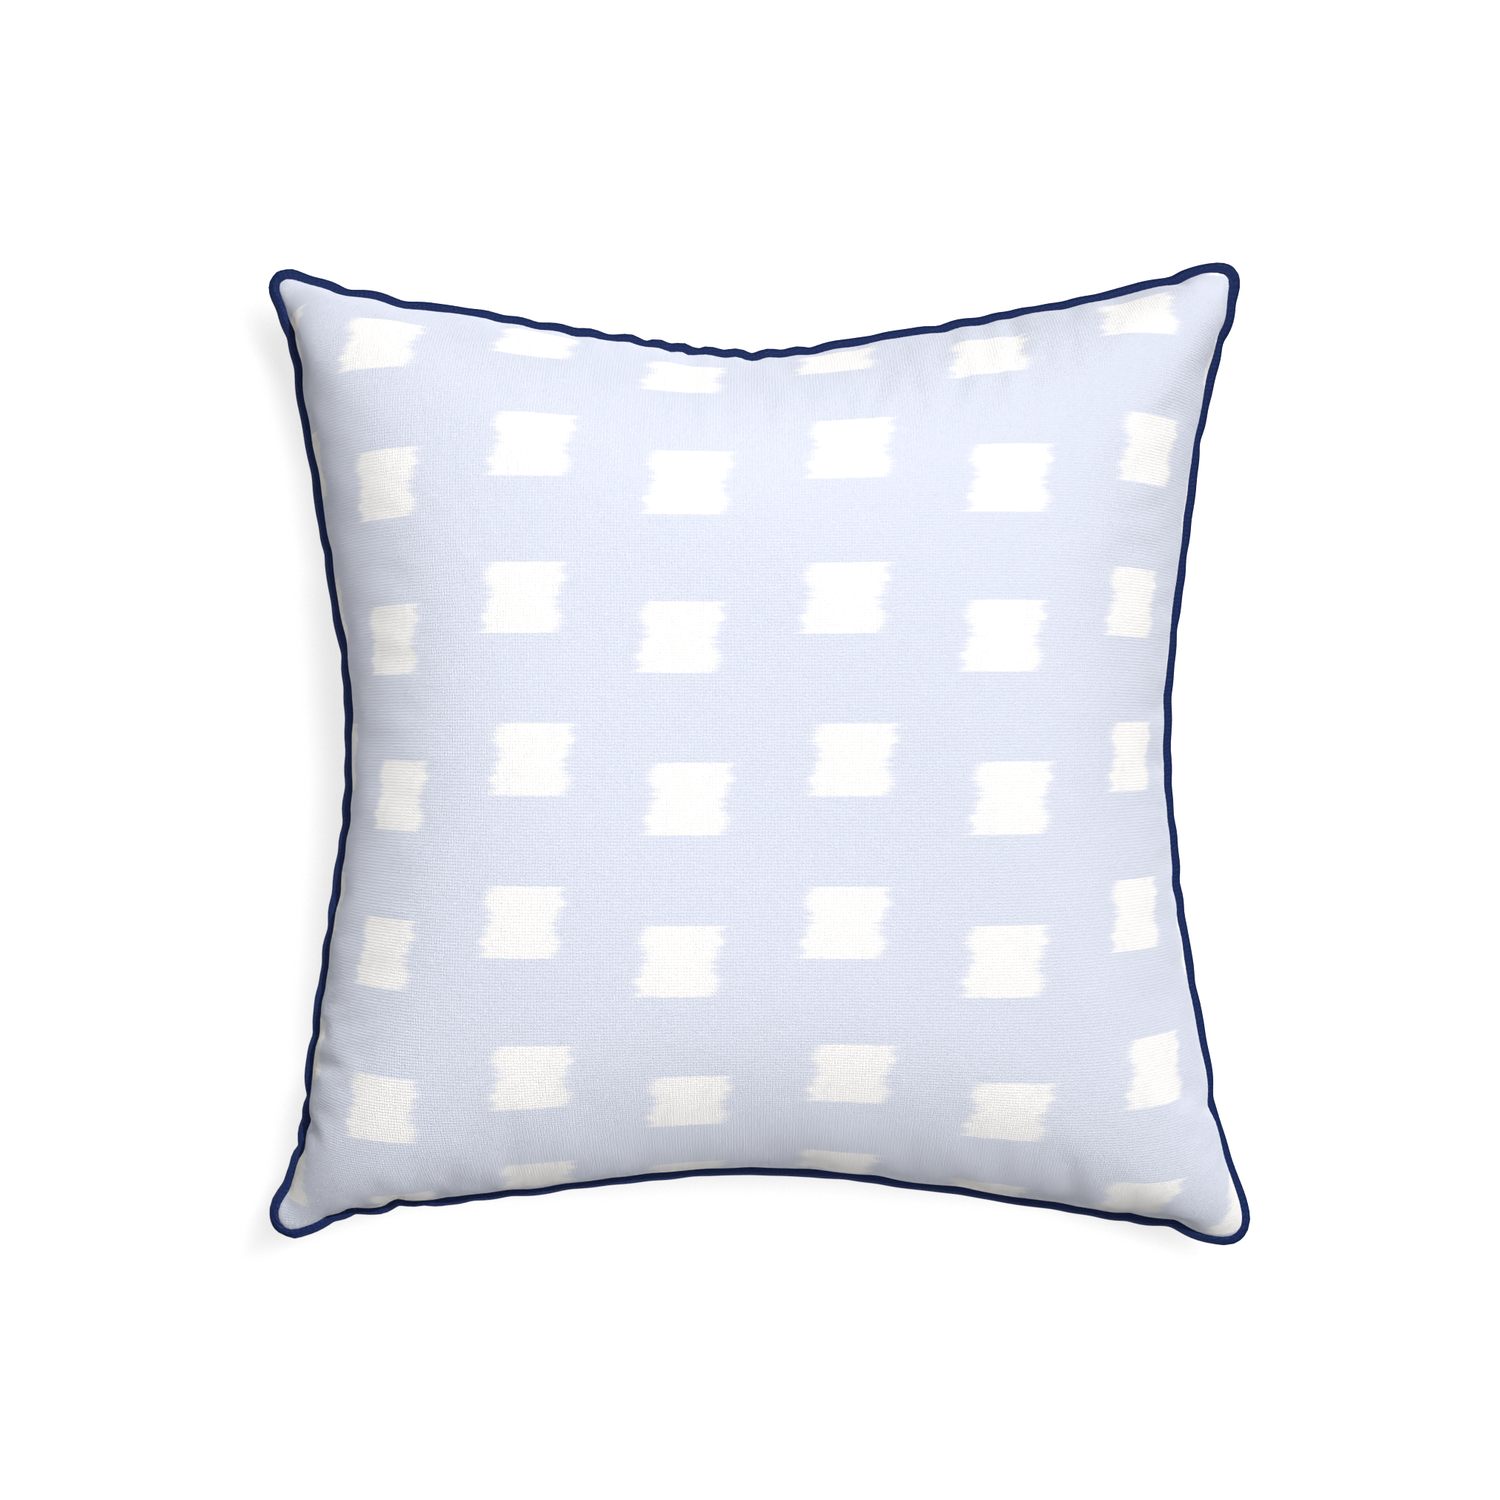 22-square denton custom sky blue patternpillow with midnight piping on white background